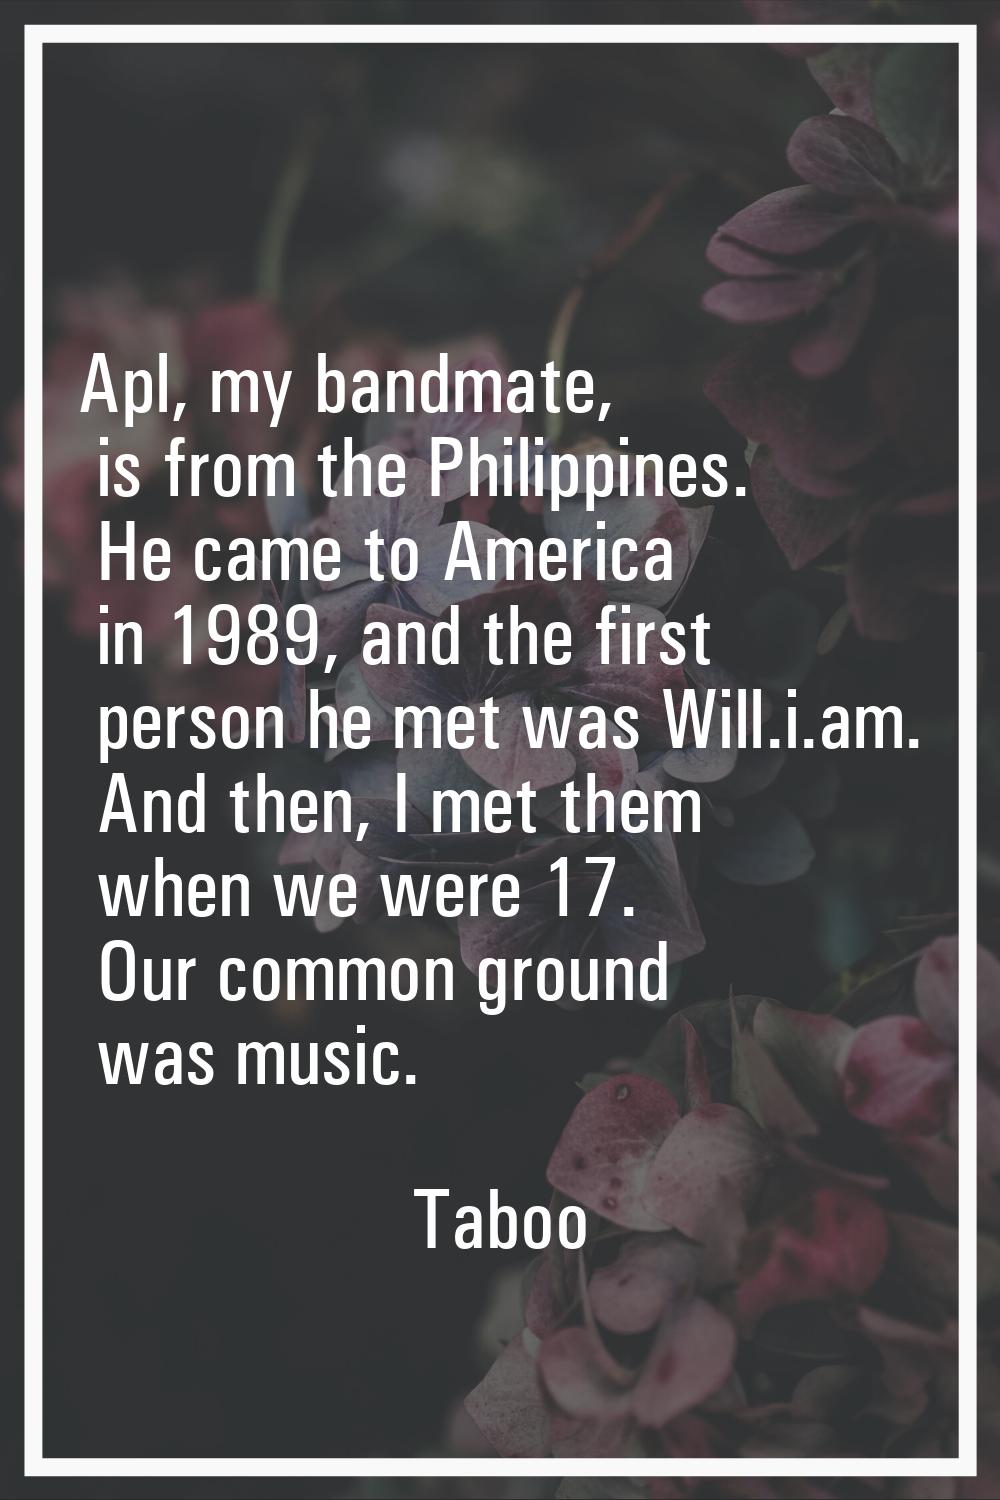 Apl, my bandmate, is from the Philippines. He came to America in 1989, and the first person he met 